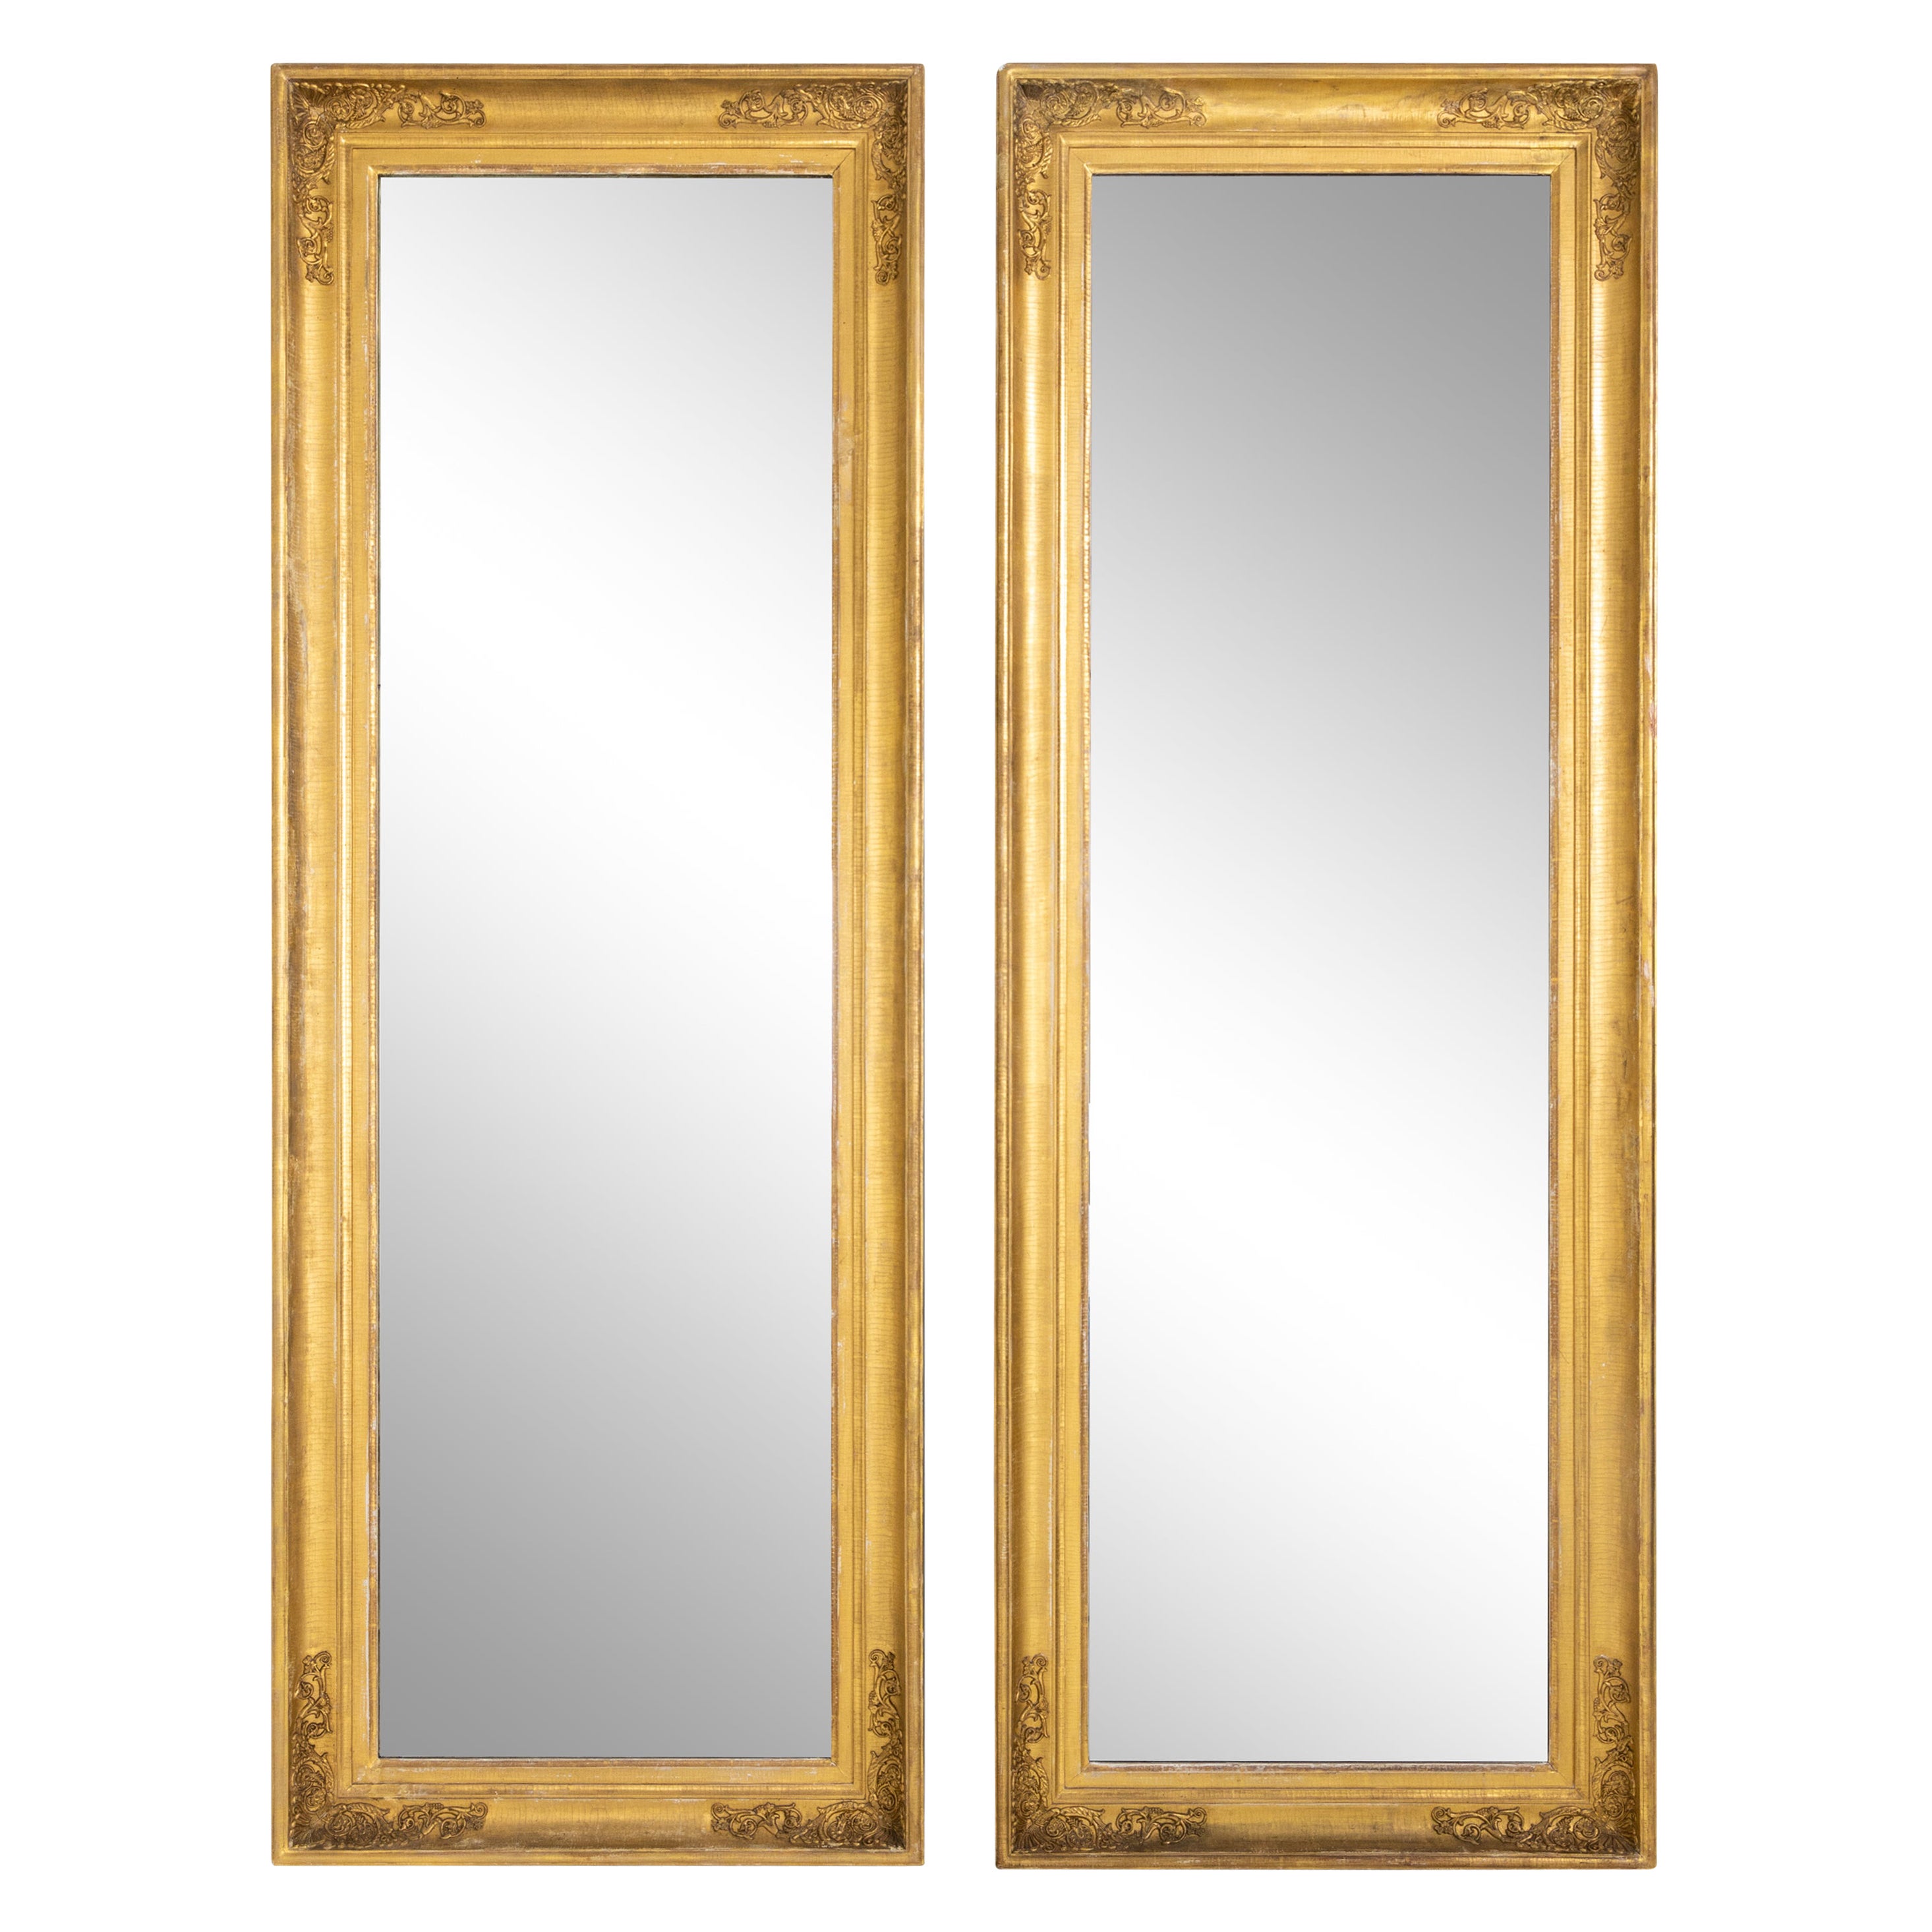 Pair of Wall Mirrors, Early 19th Century